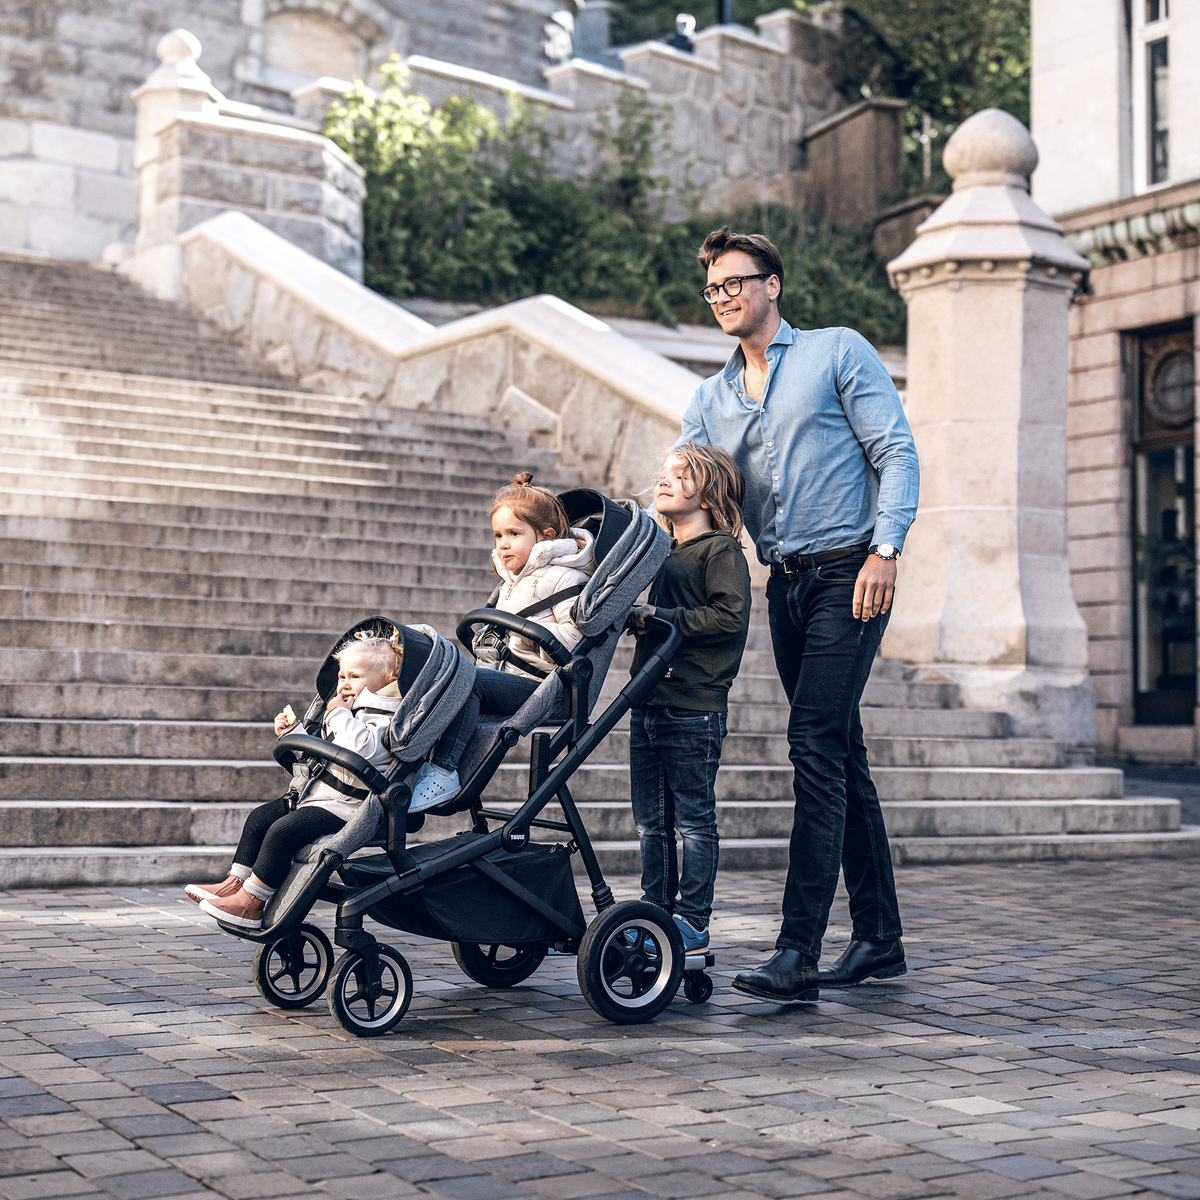 On a cobbled street next to stairs, a man pushes his two children in a Thule Sleek double stroller.